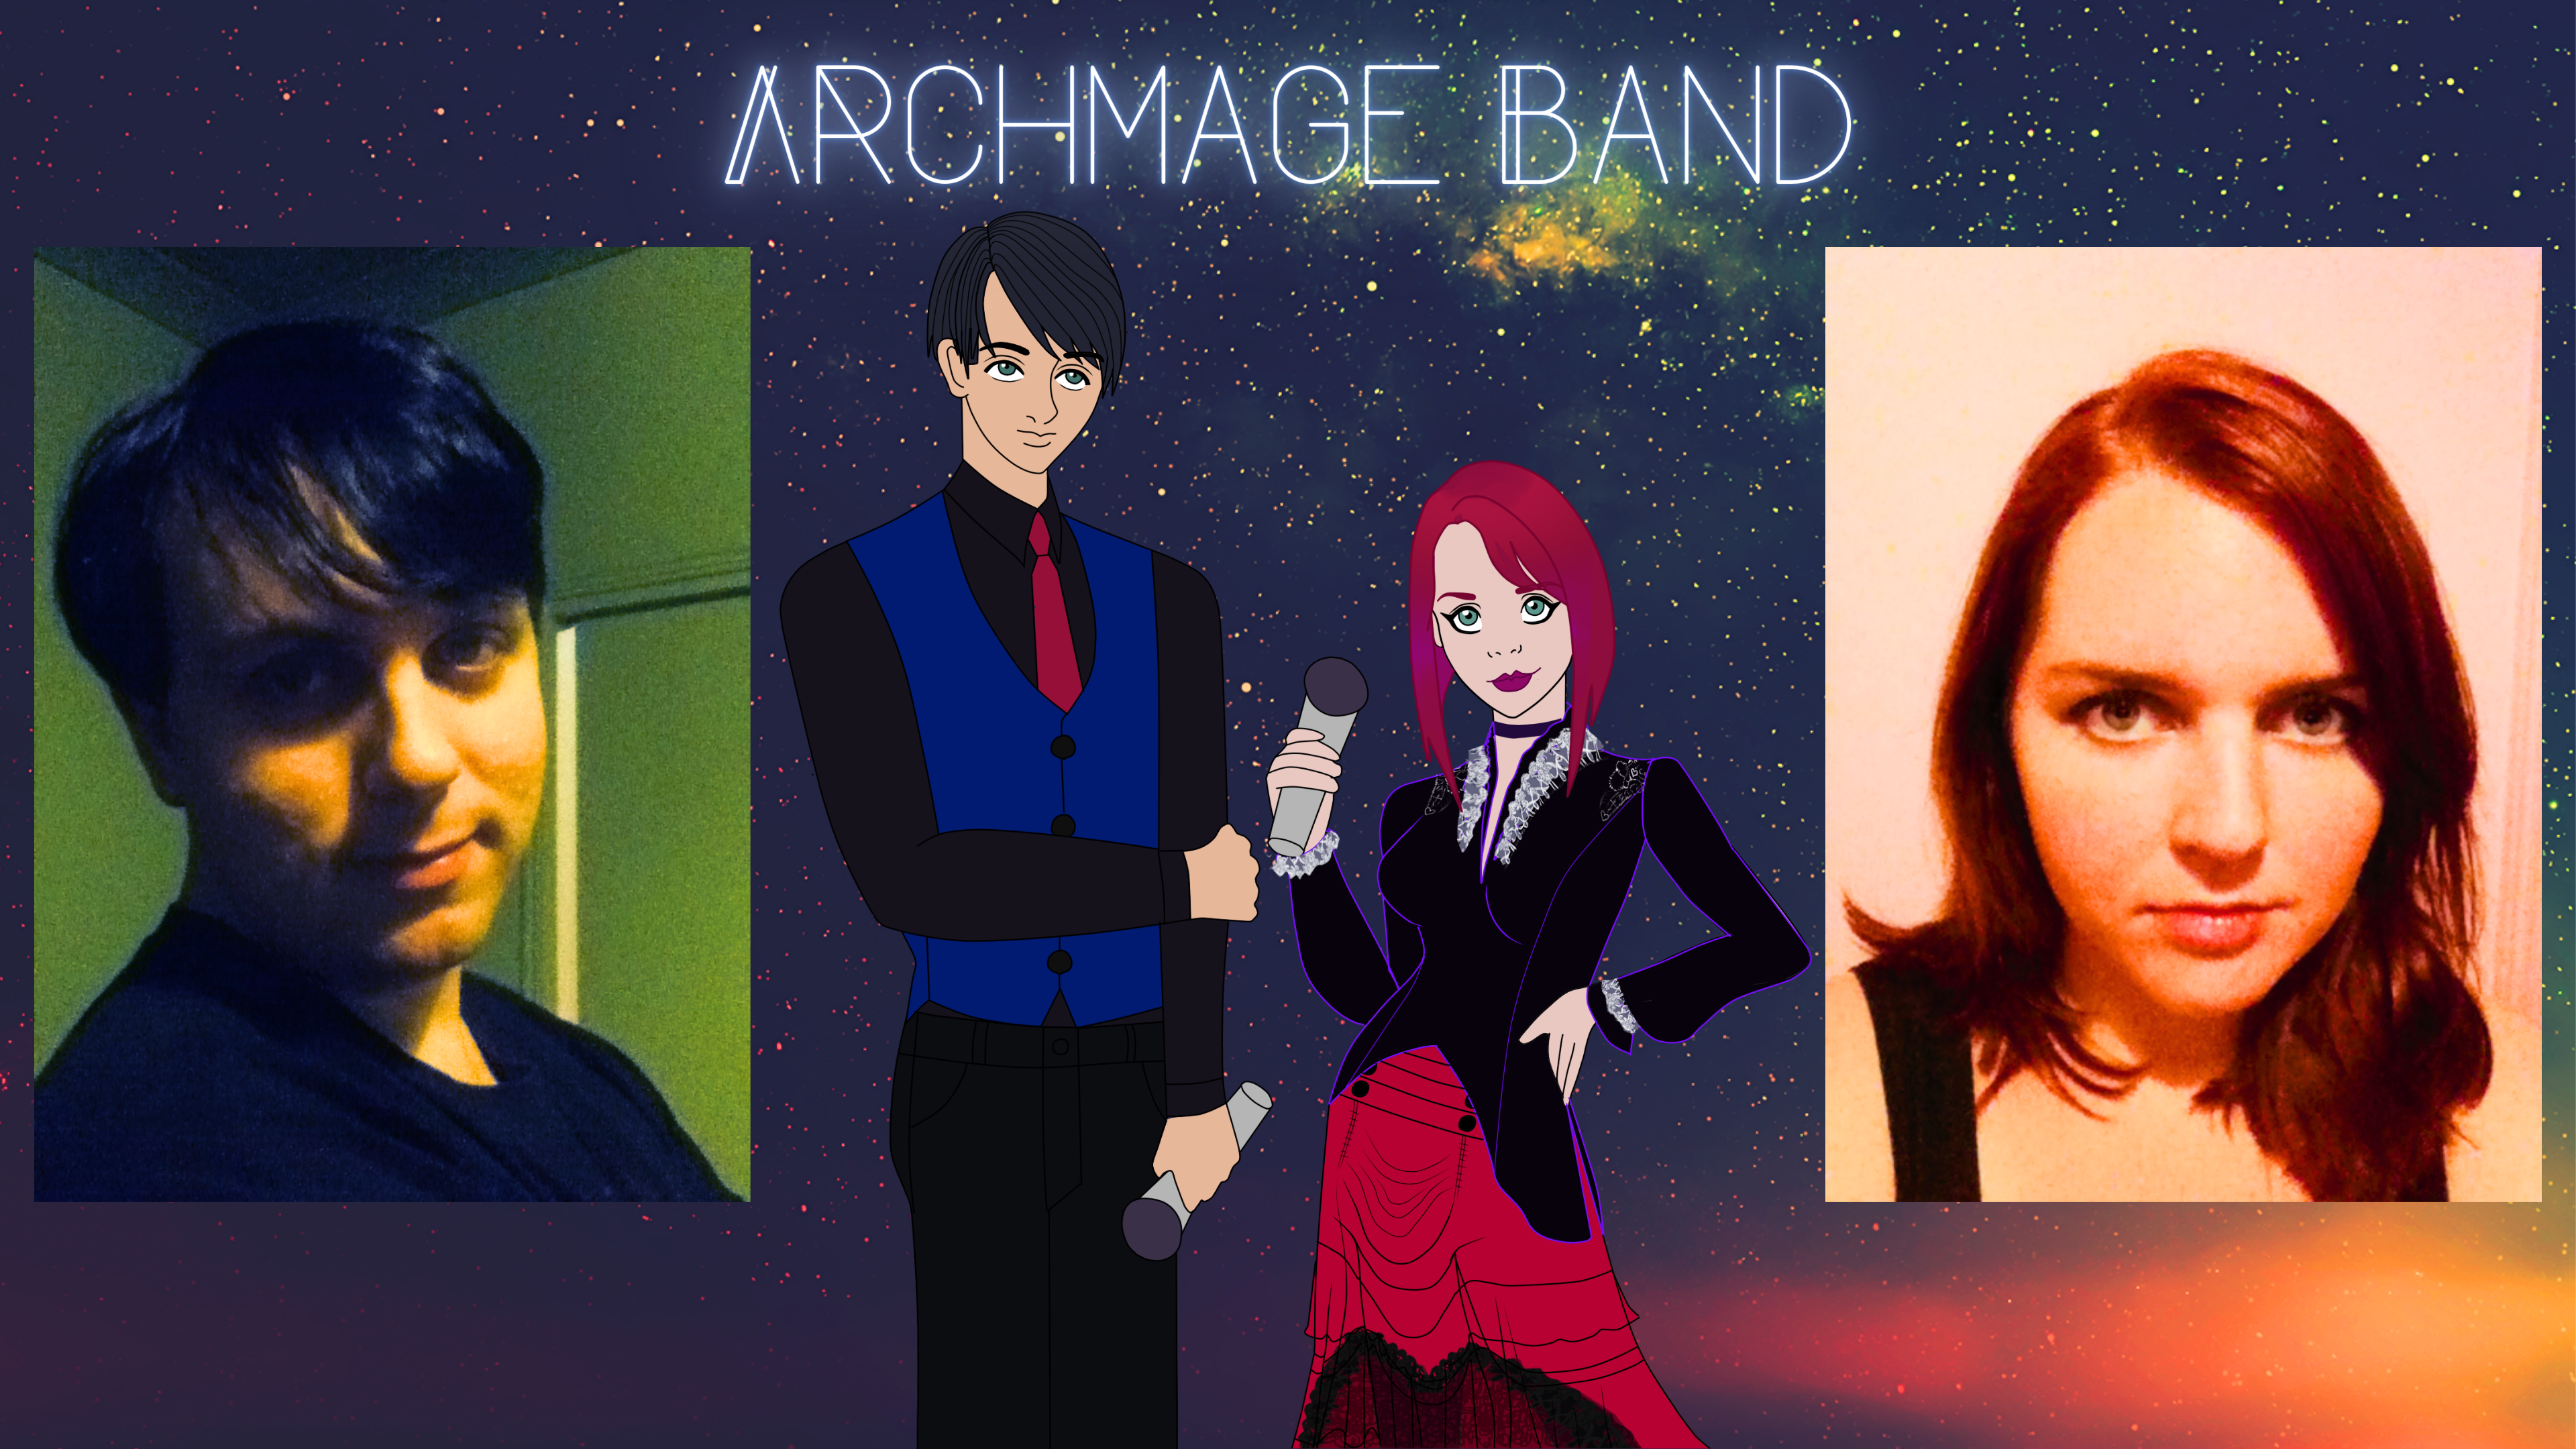 Meet Masha Solo and Rob Ulysses, the Duo of Archmage Band